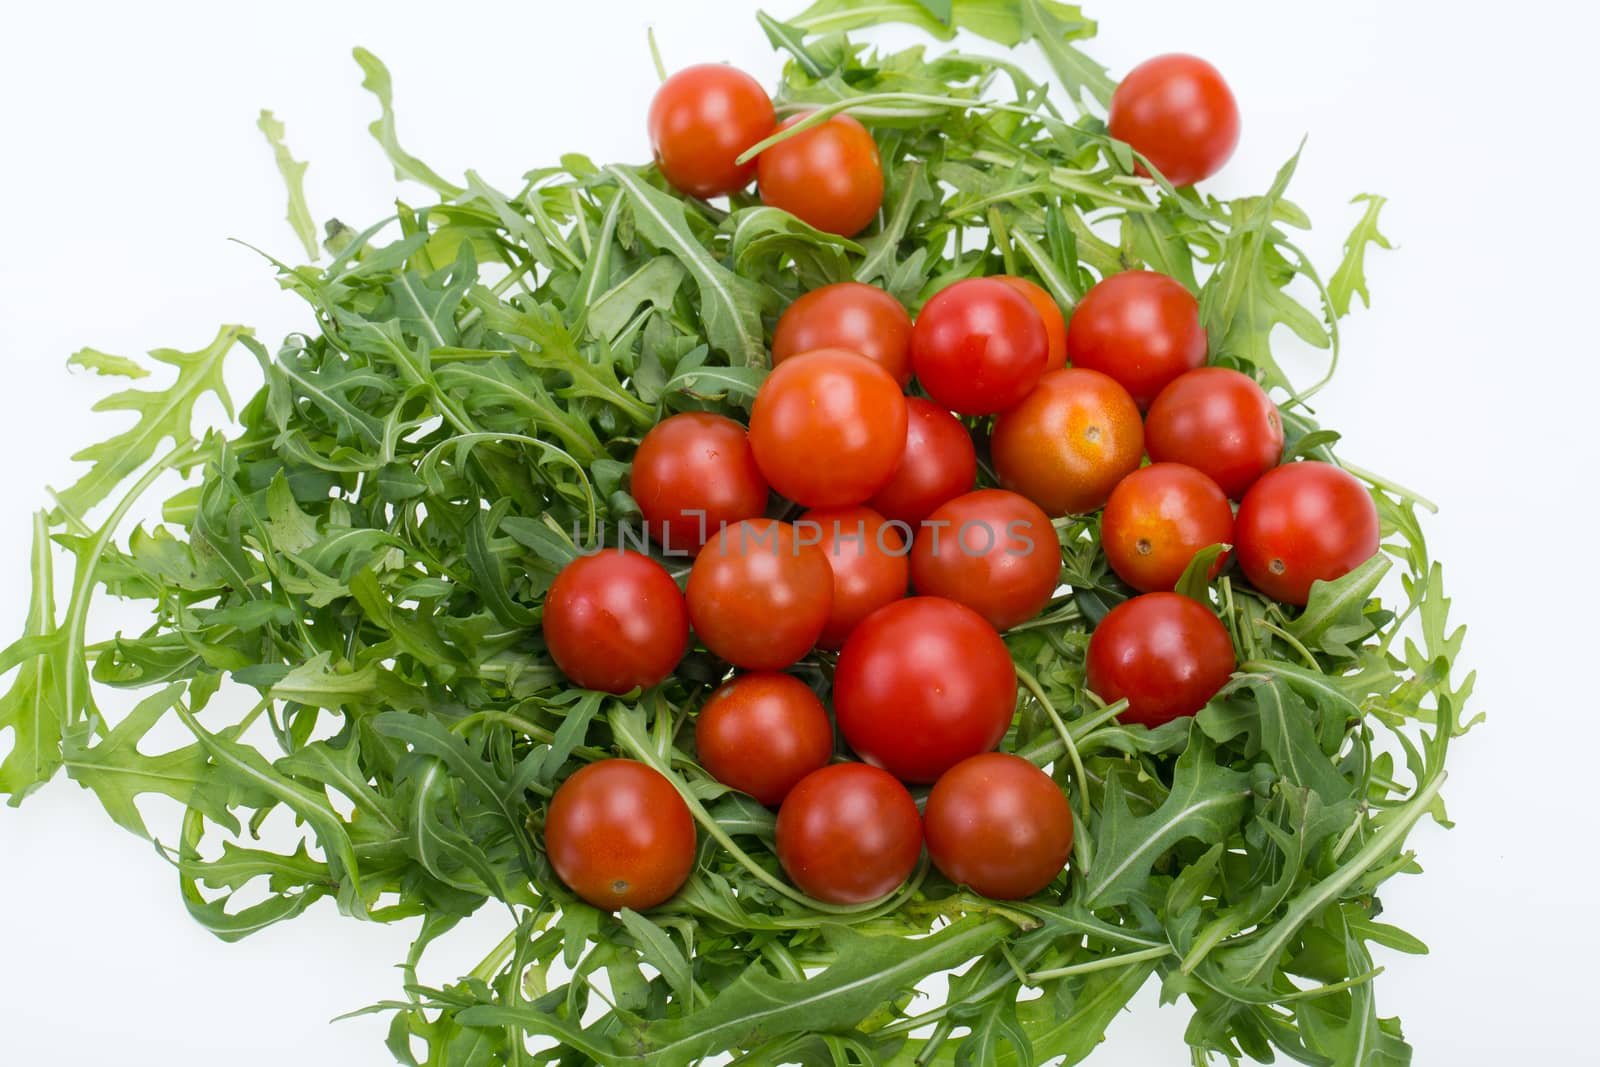 Heap of ruccola leaves and cherry tomatoes by wjarek